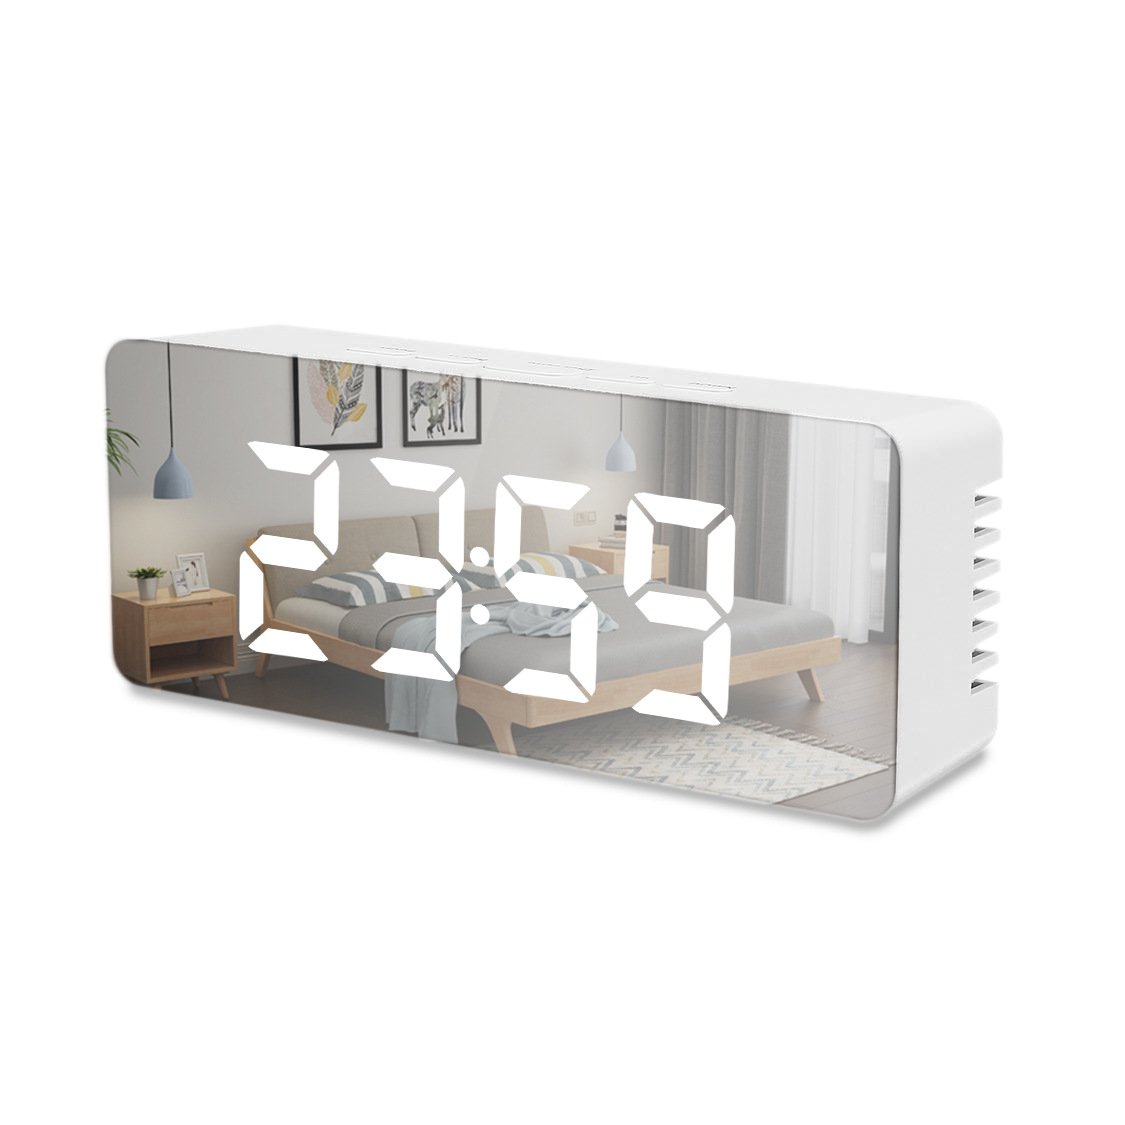 multi-functional mirror electronic alarm clock , Clock corporate gifts , Apex Gift